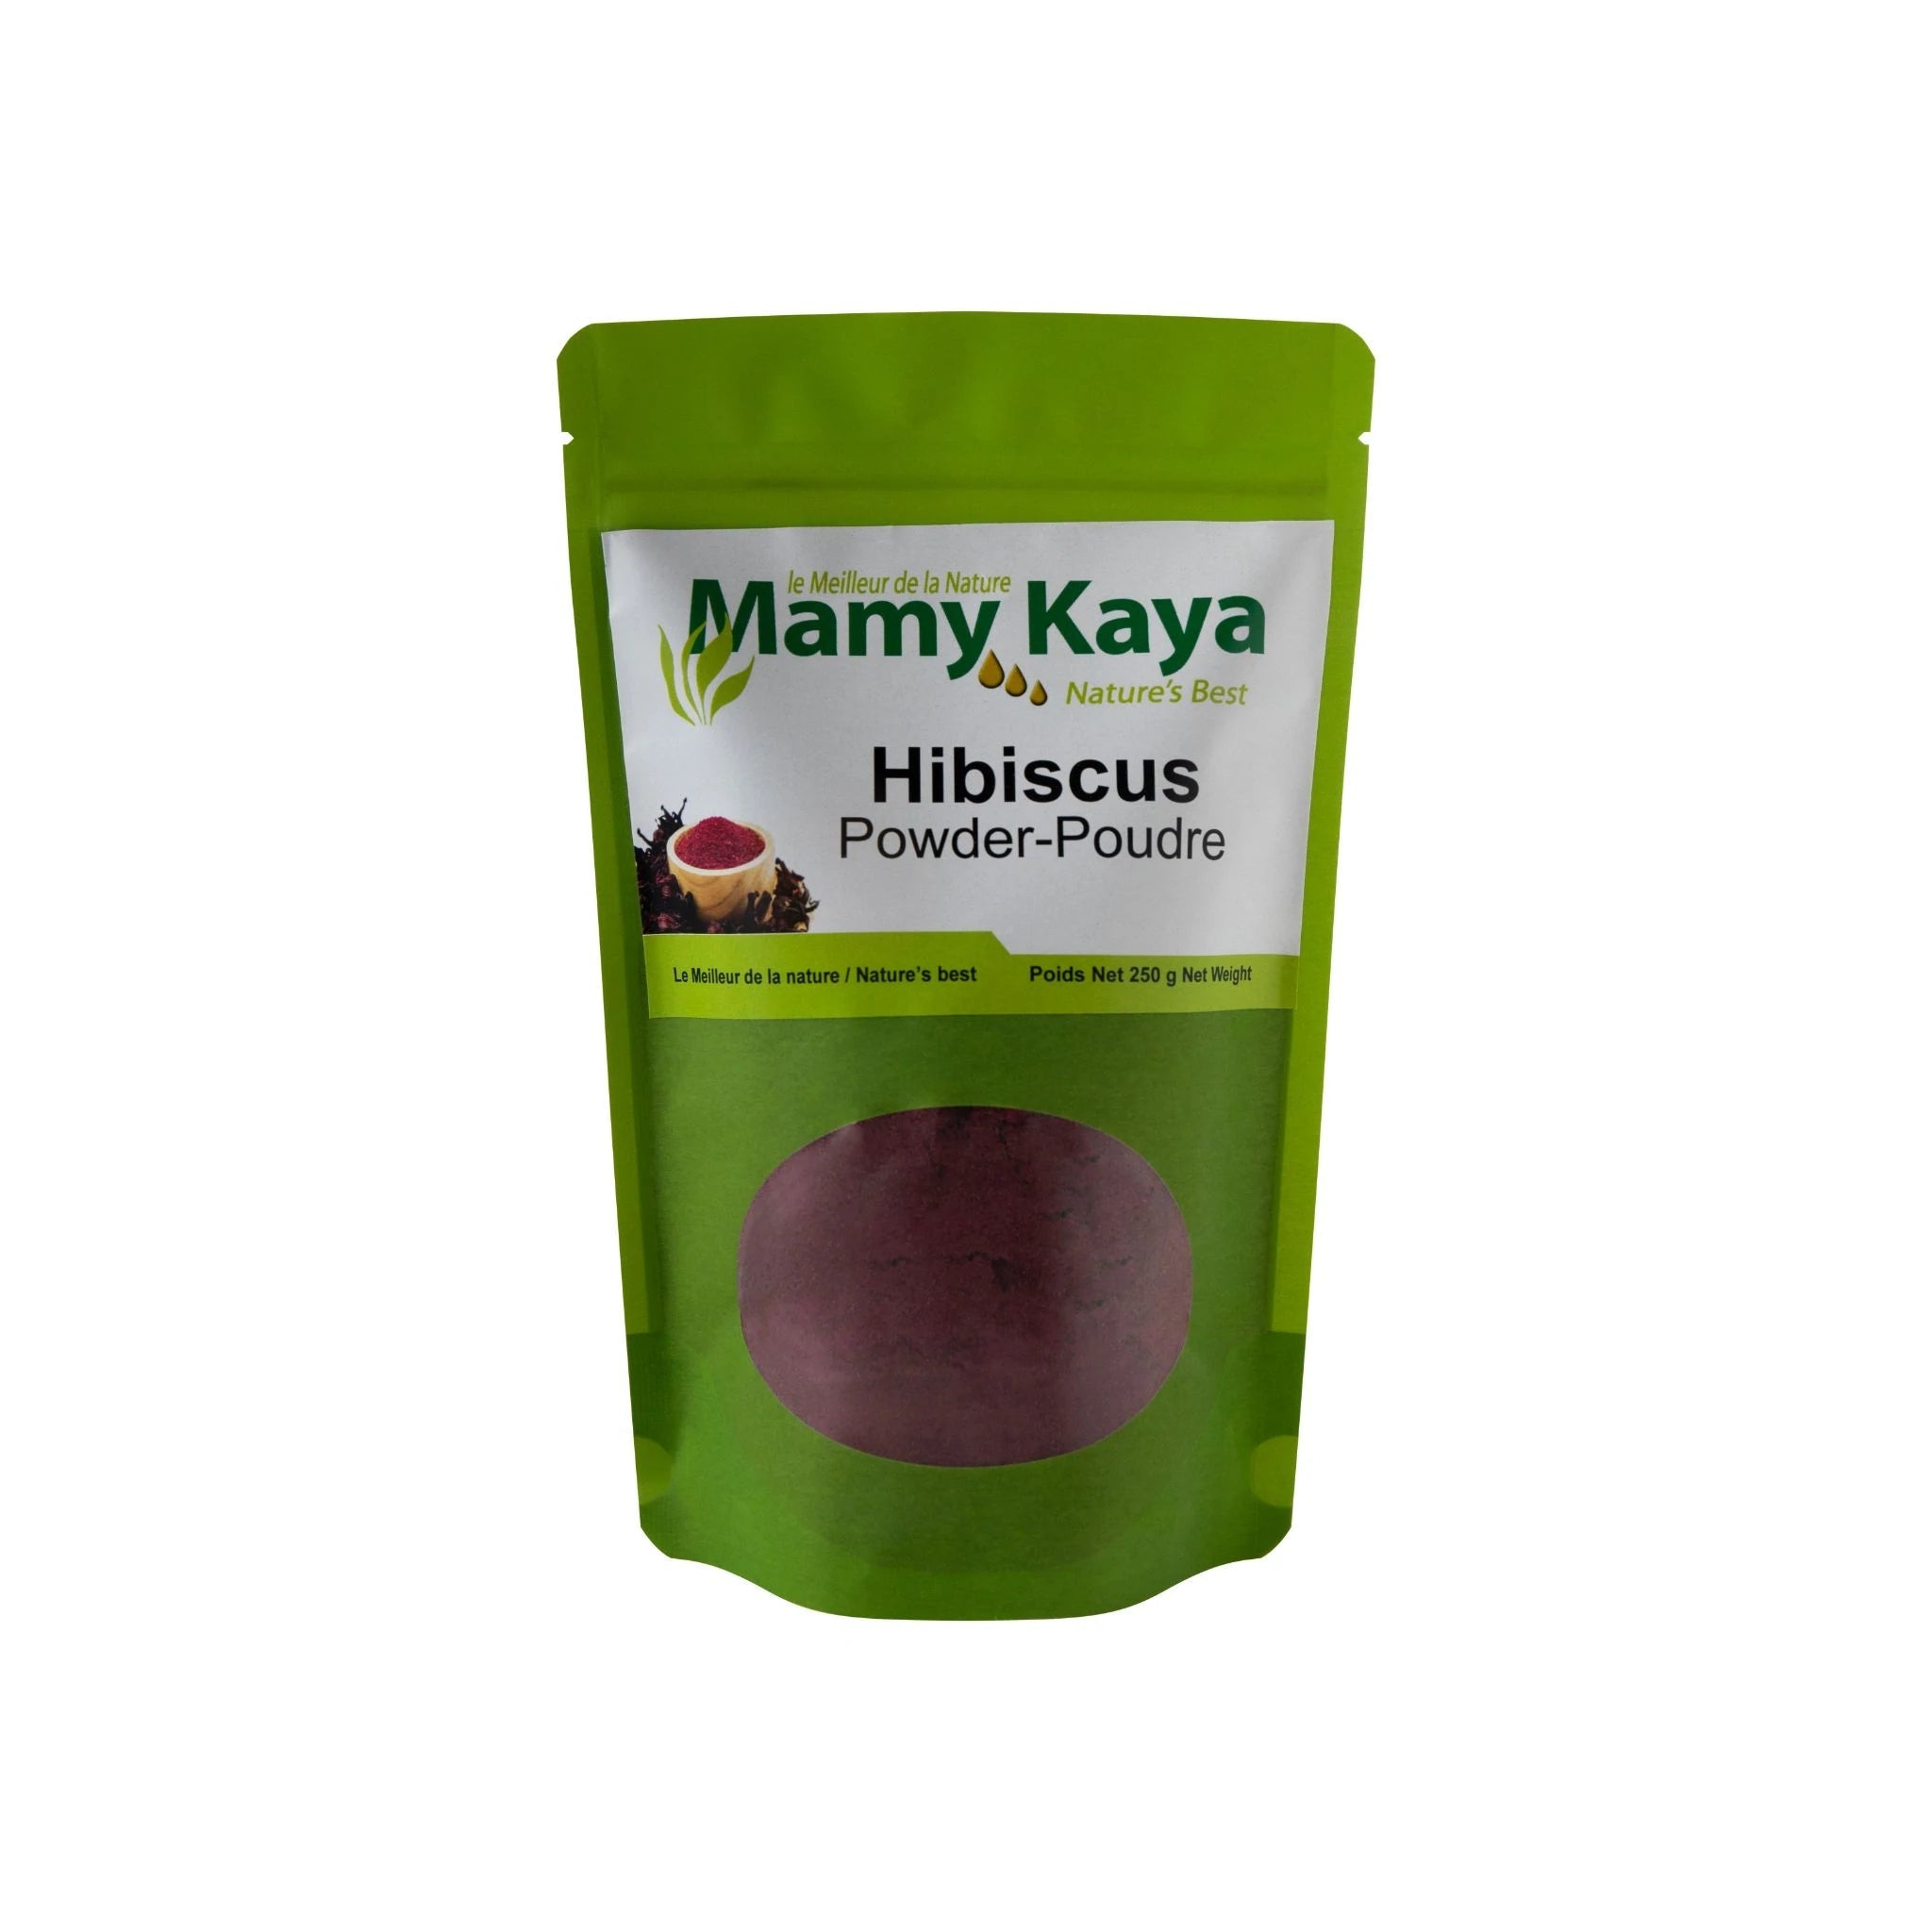 Mamy Kaya - Poudre d'Hibiscus 250g